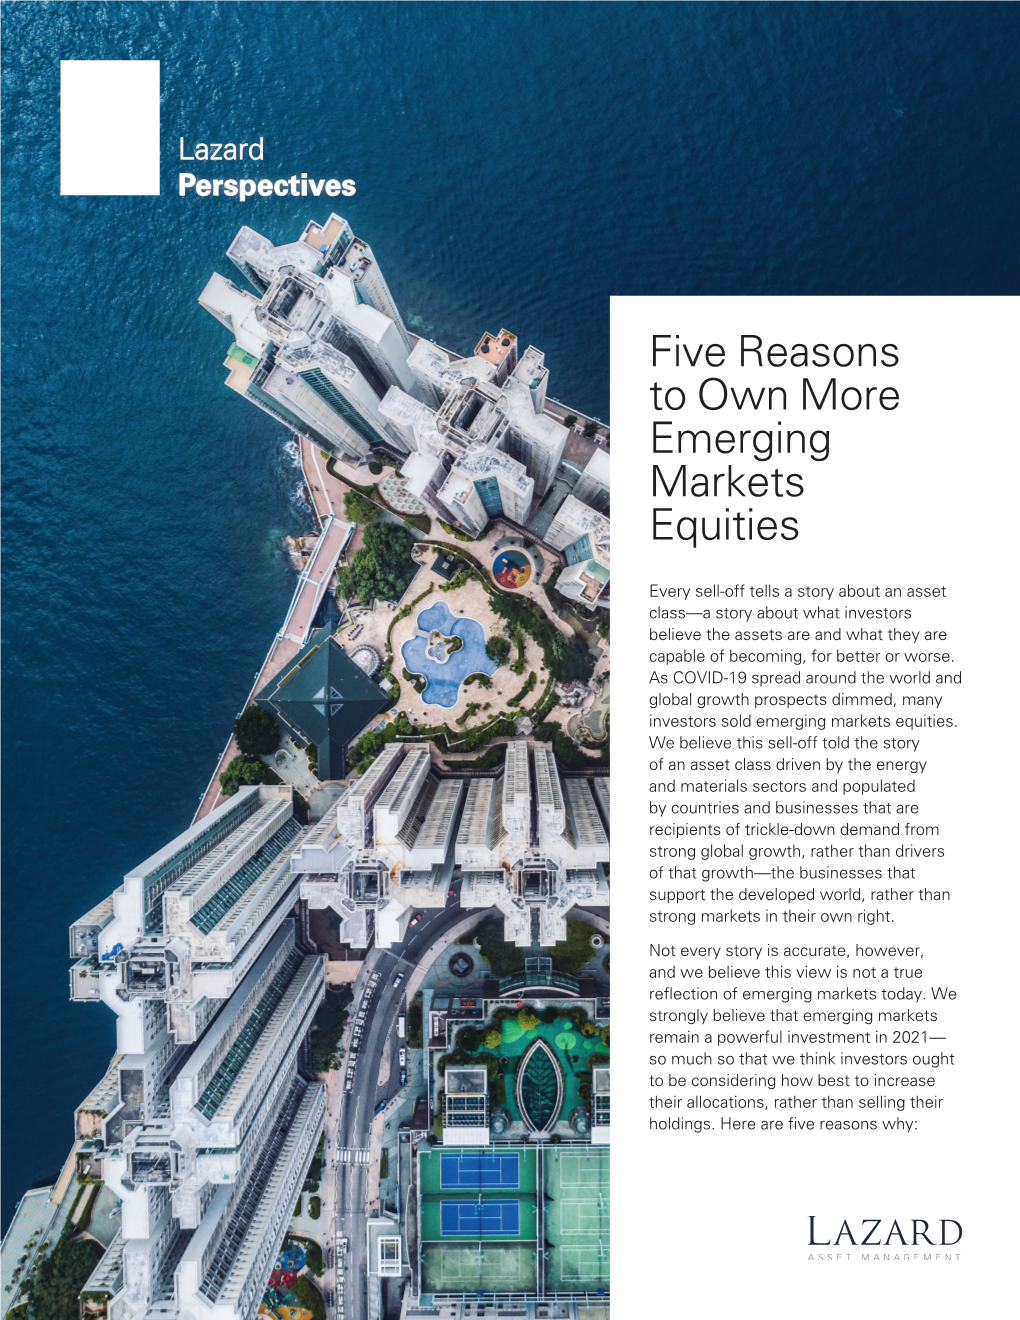 Five Reasons to Own More Emerging Markets Equities